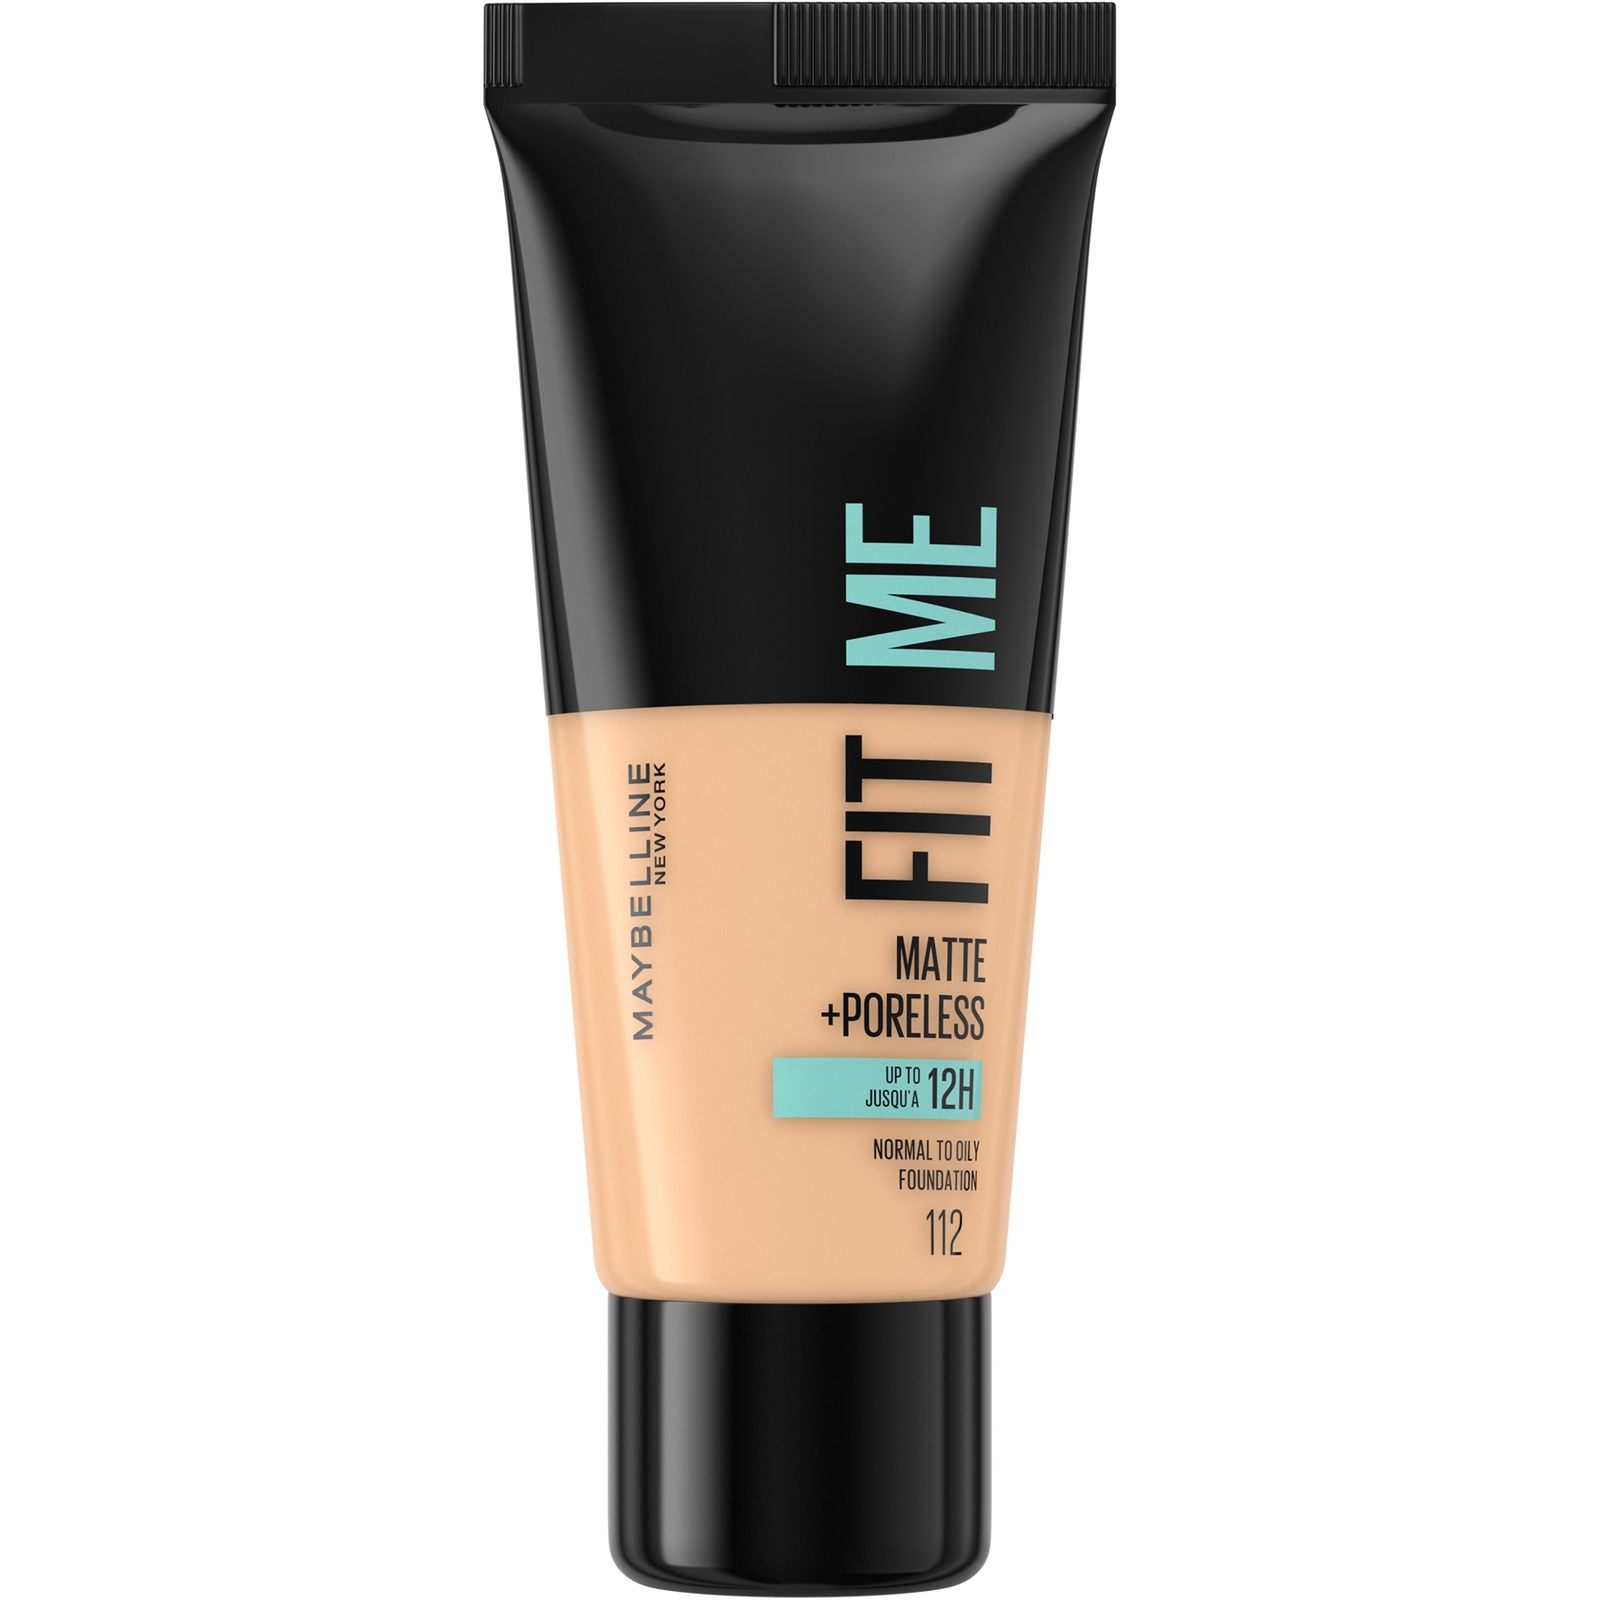 Maybelline Fit Me! Matte and Poreless Foundation 30ml (Various Shades) - 112 Soft Beige